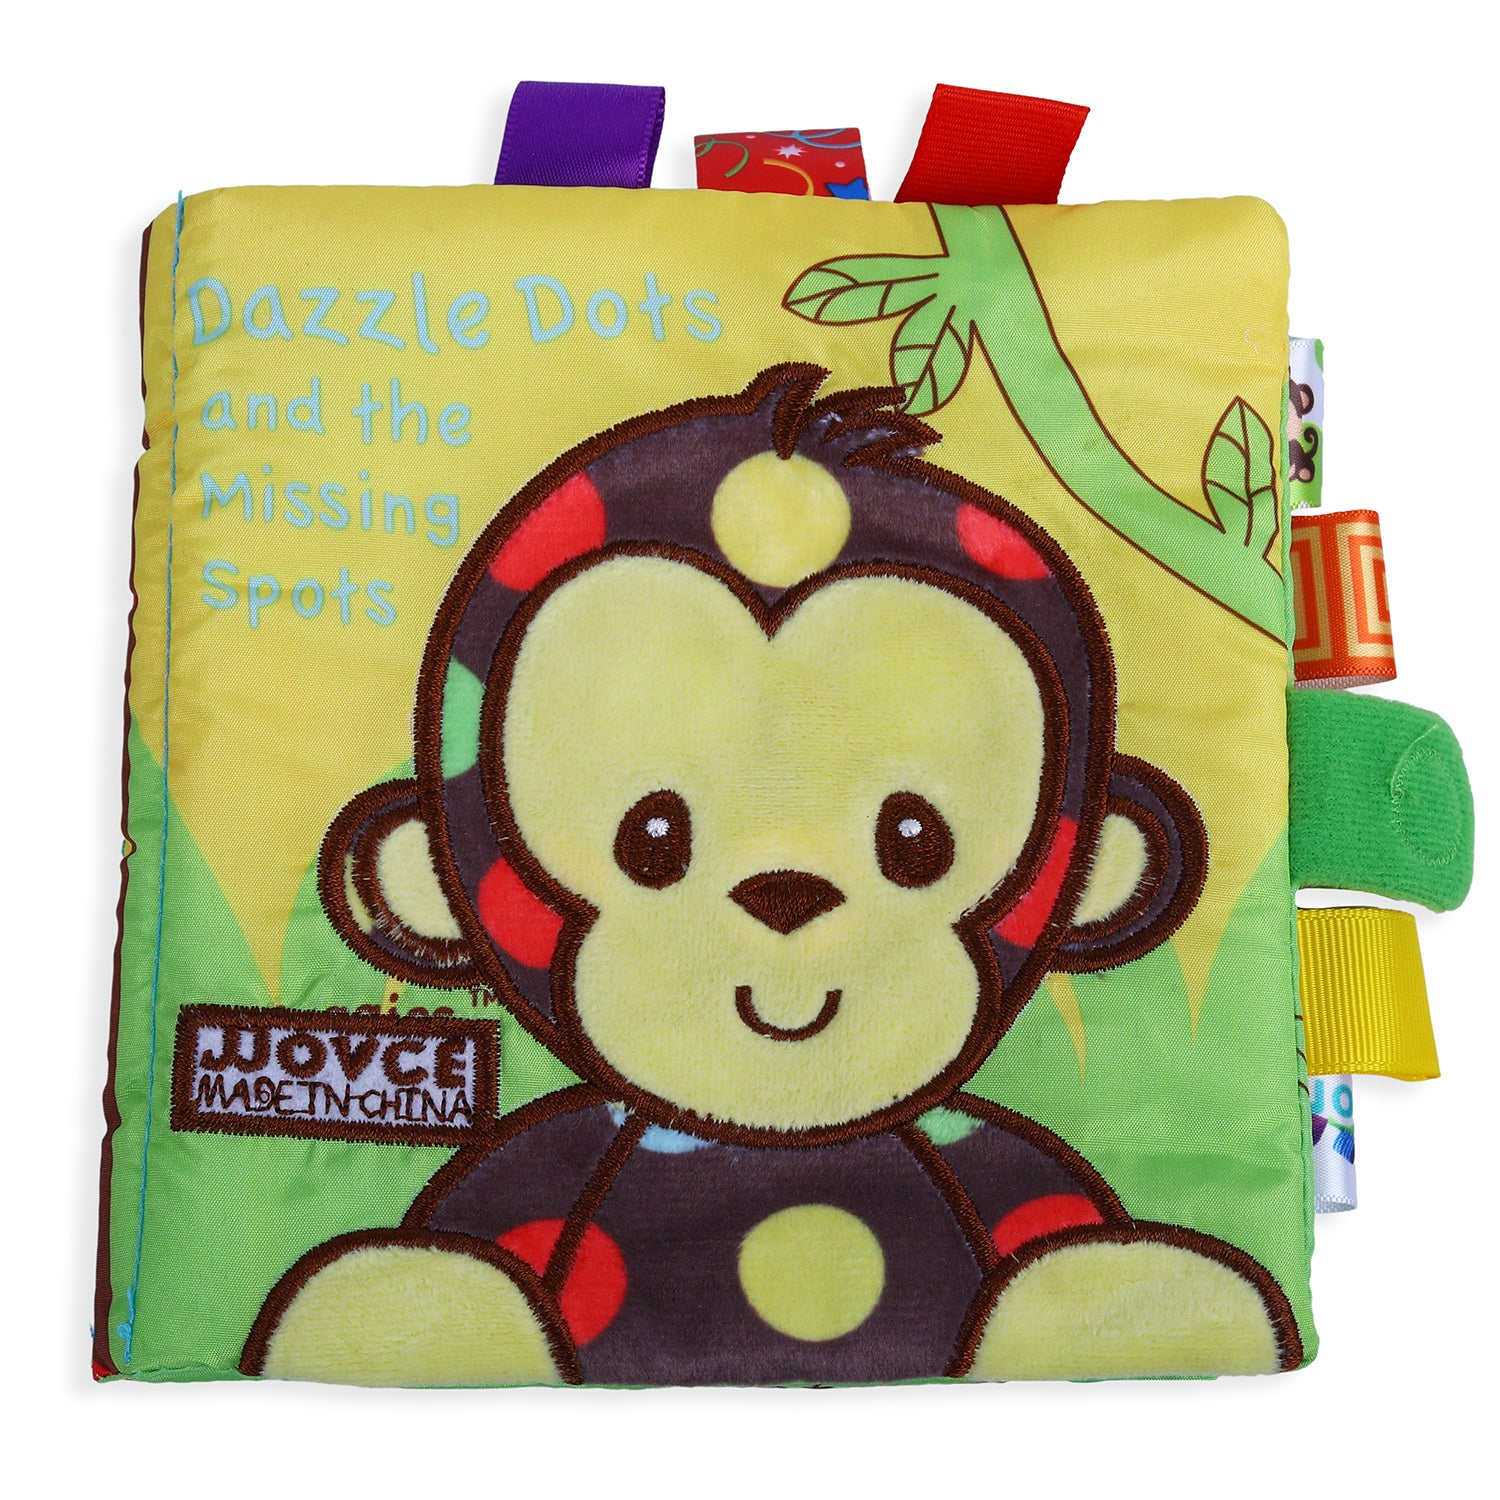 Dazzle Dots Educational Learning 3D Cloth Book With Rustle Paper - Multicolour - Baby Moo